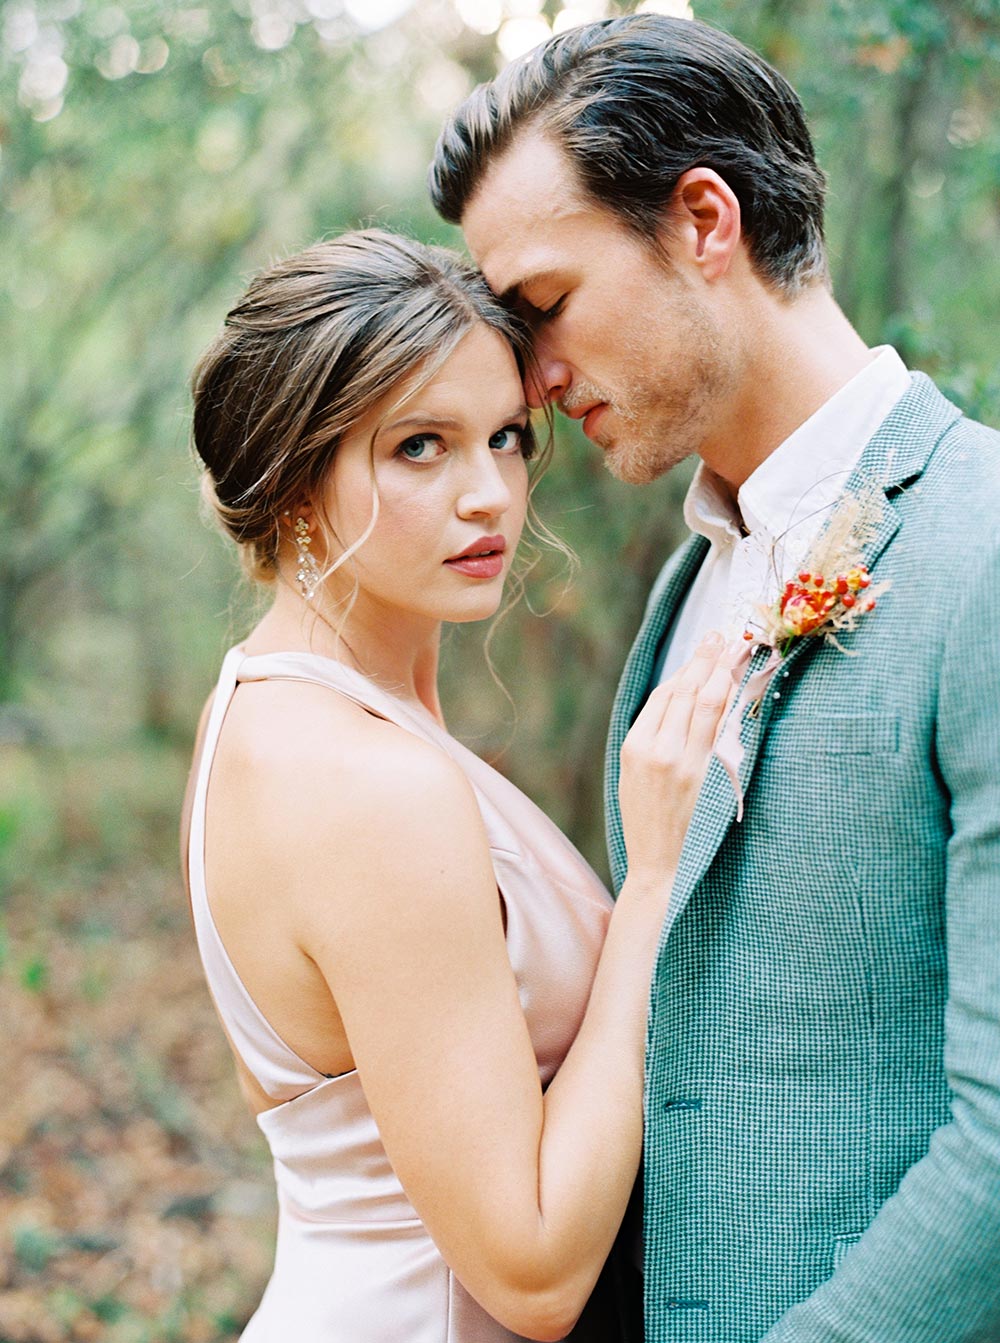 autumn wedding ceremony with a groom in sage green suit and a bride in apricot silk gown and romantic, wispy updo